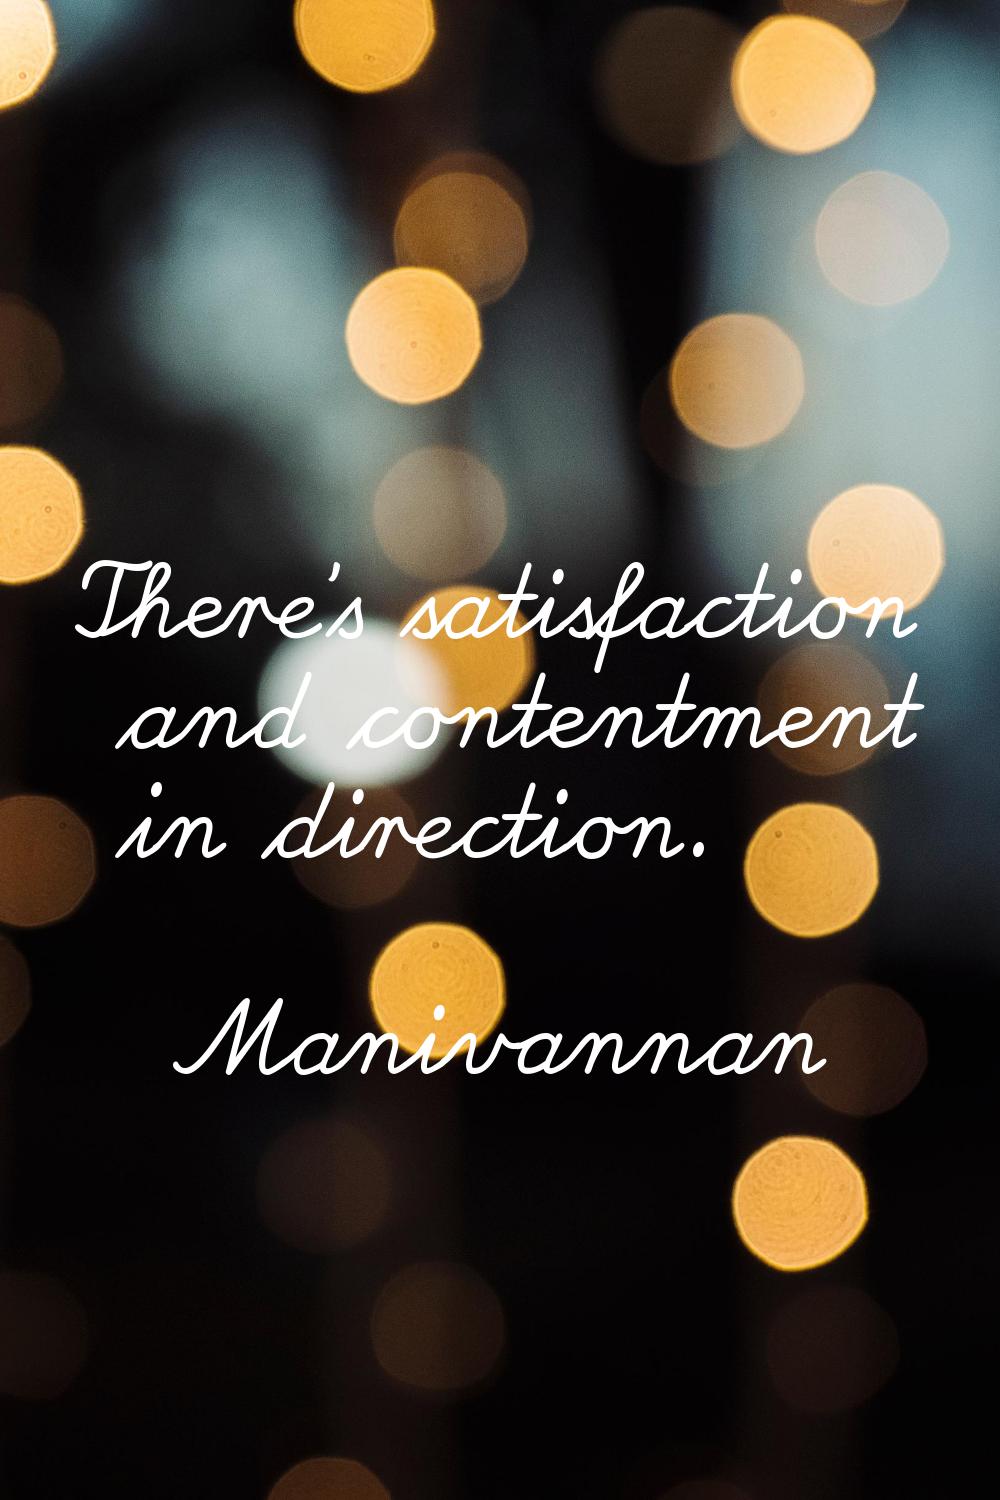 There's satisfaction and contentment in direction.